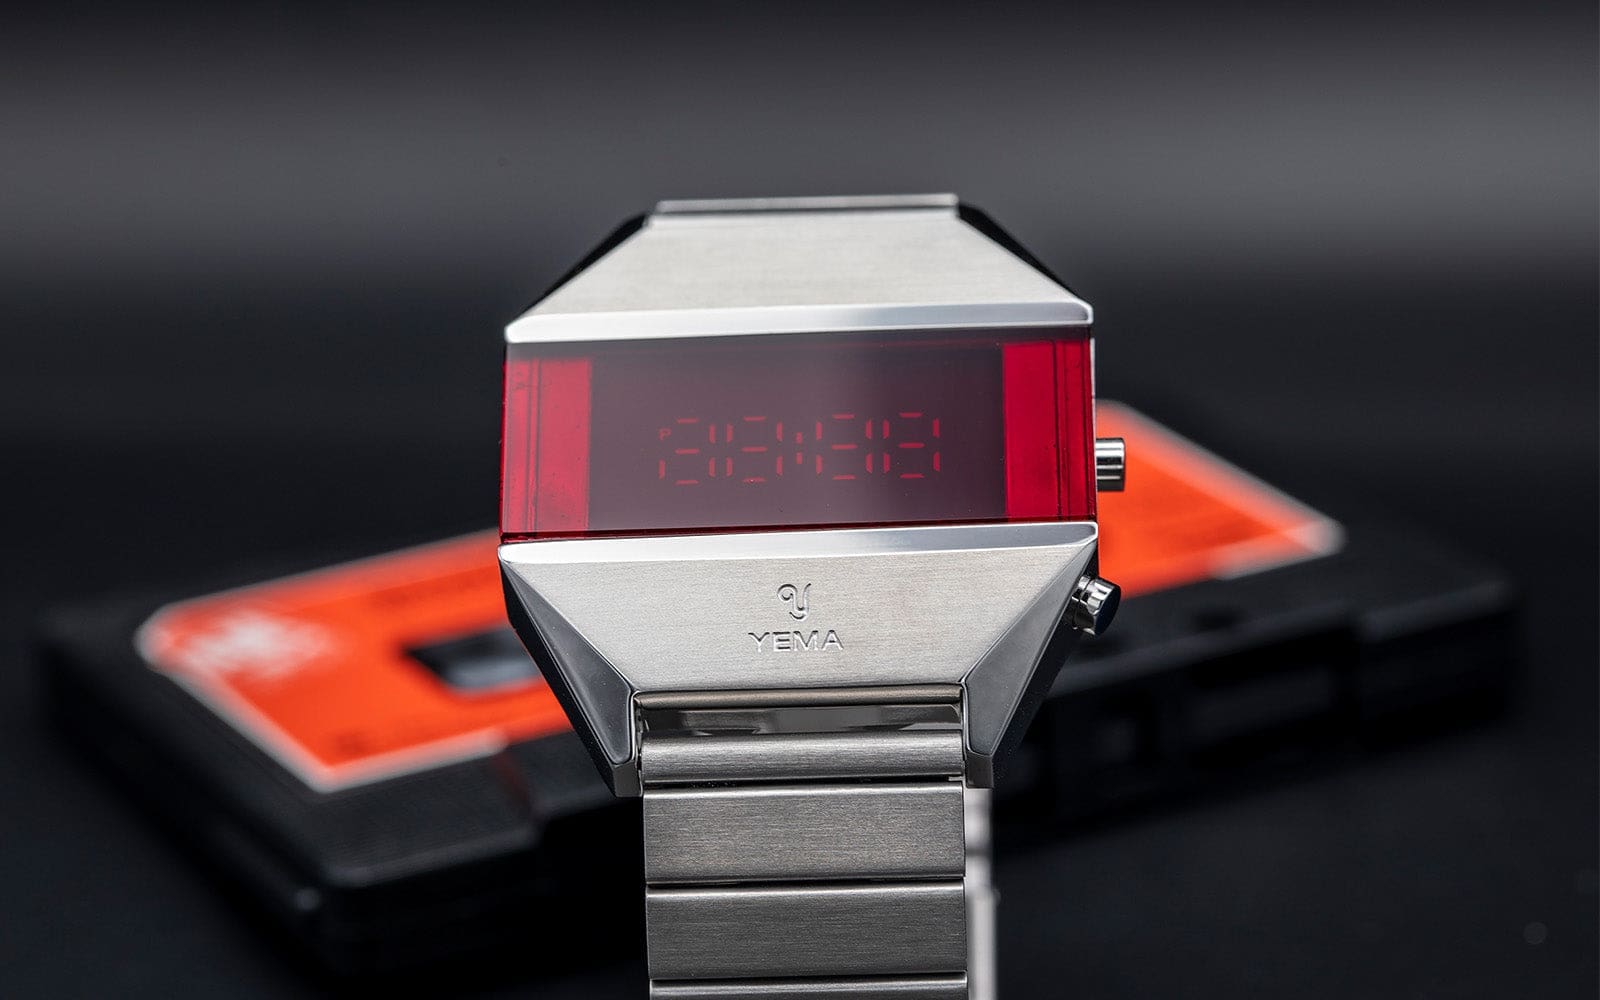 Five of the best modern LED watches in order of price